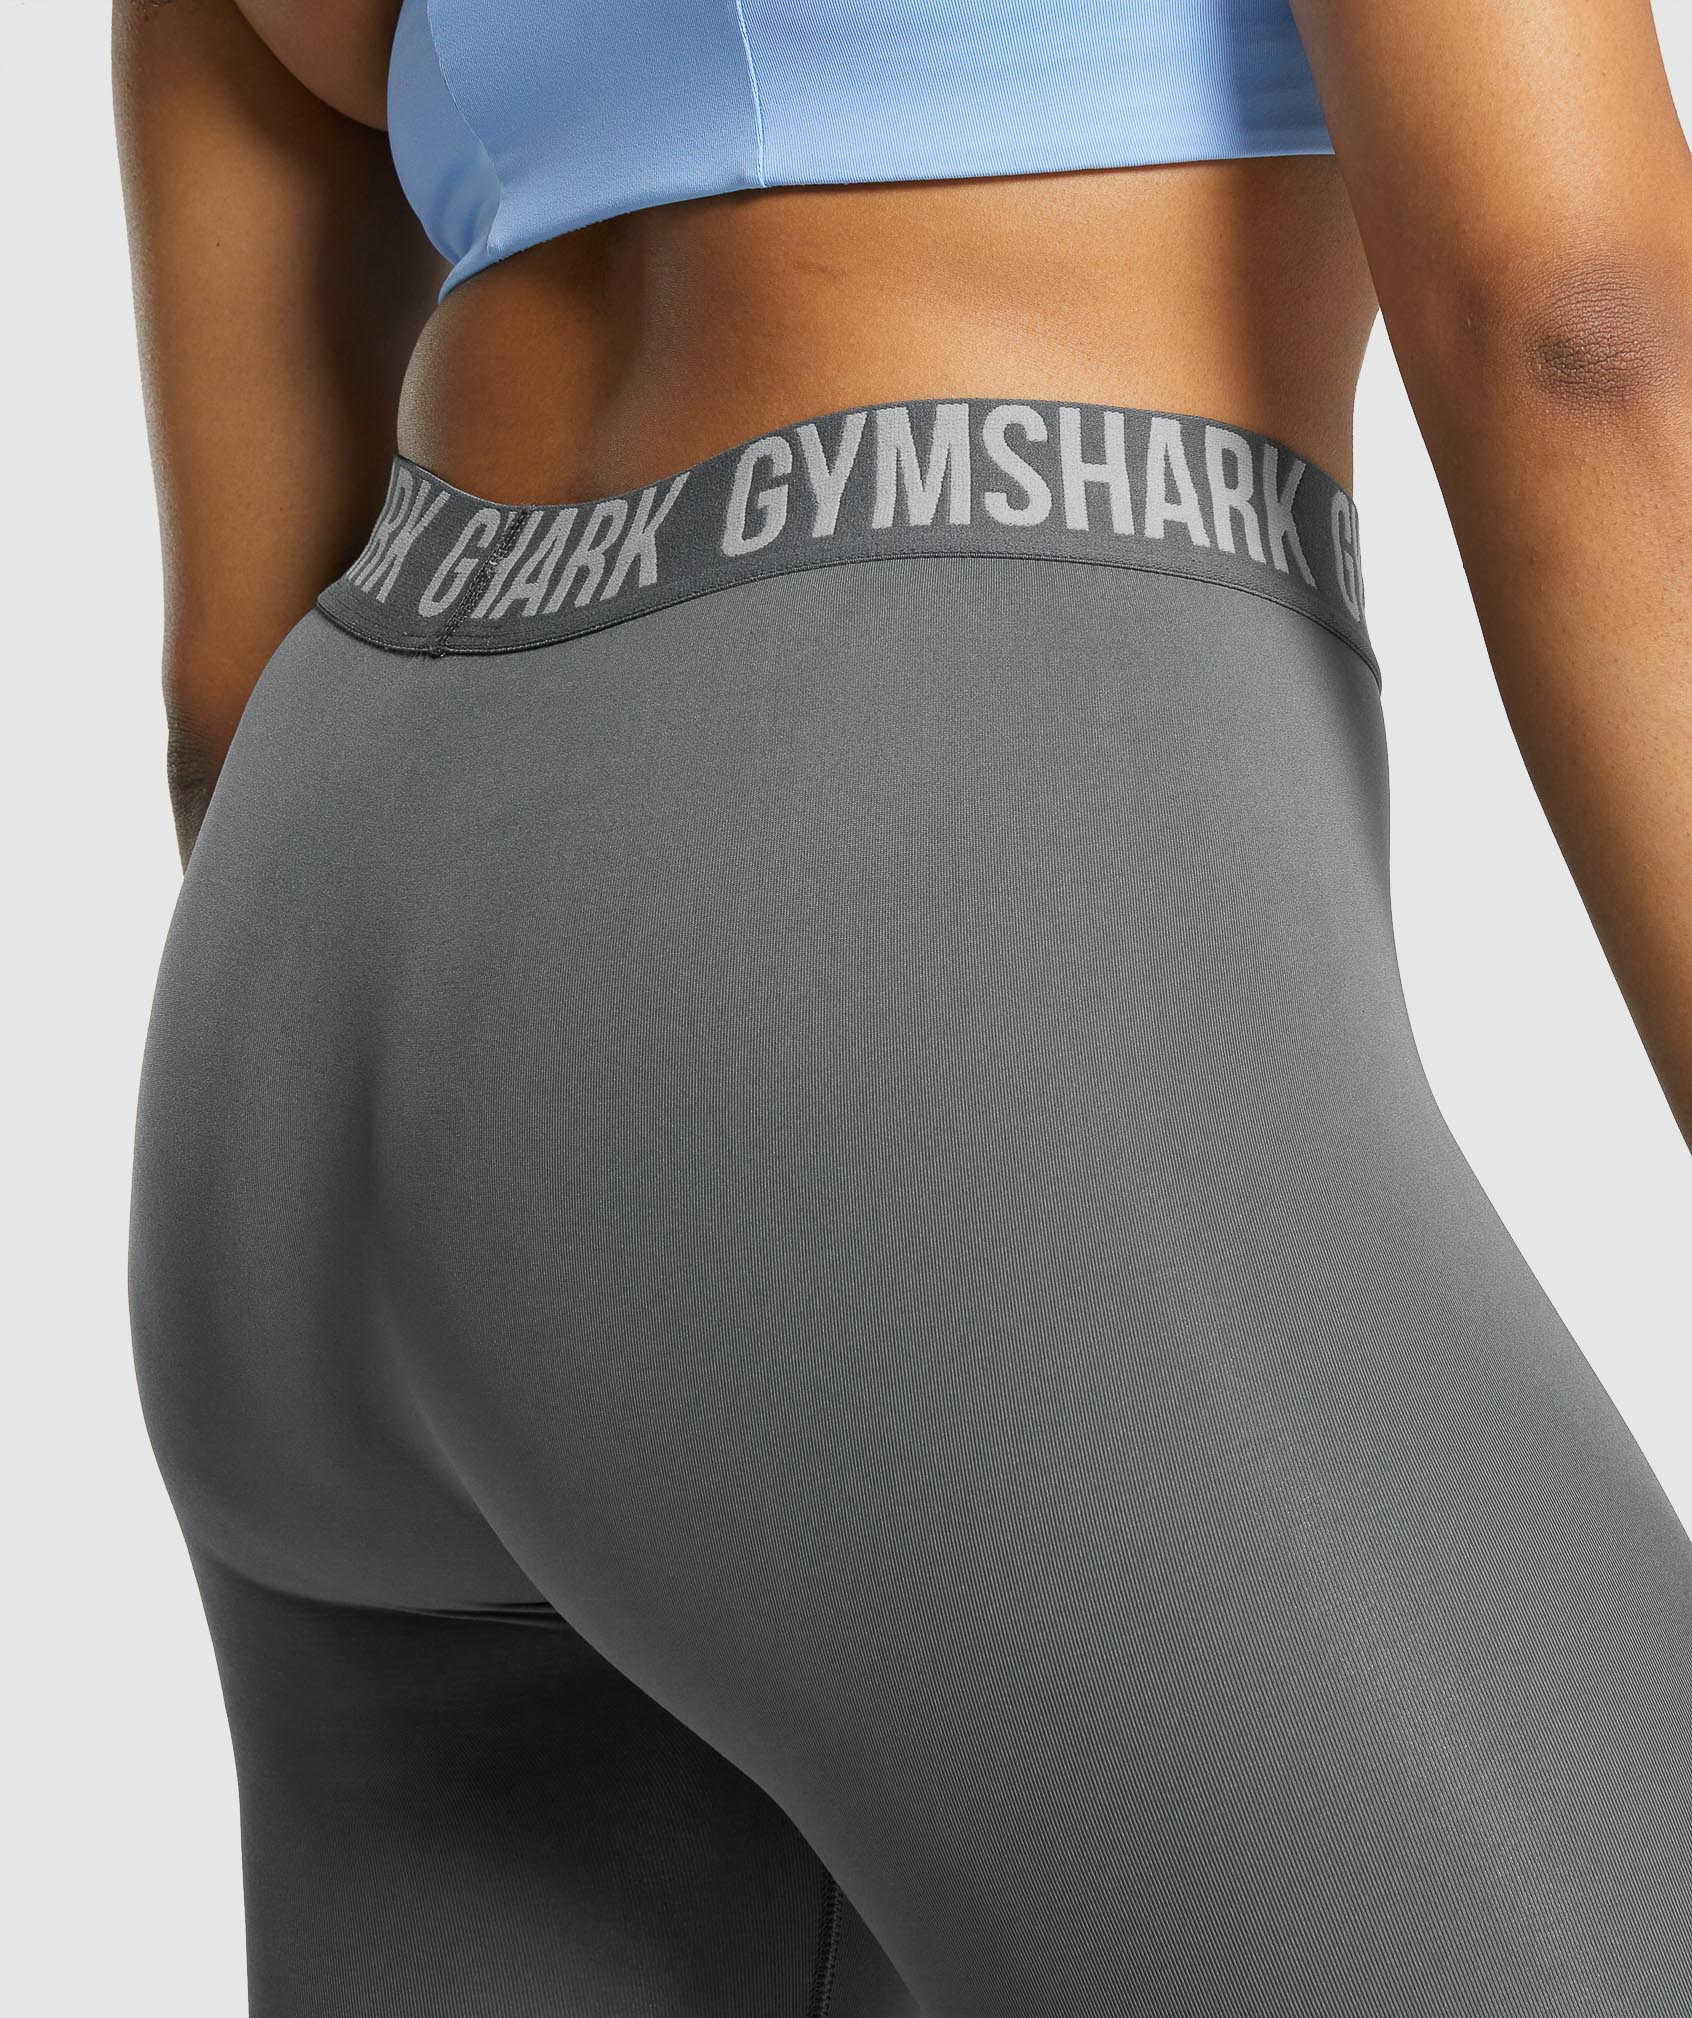 Gymshark Fit Seamless Legging ONLY in charcoal gray, Women's